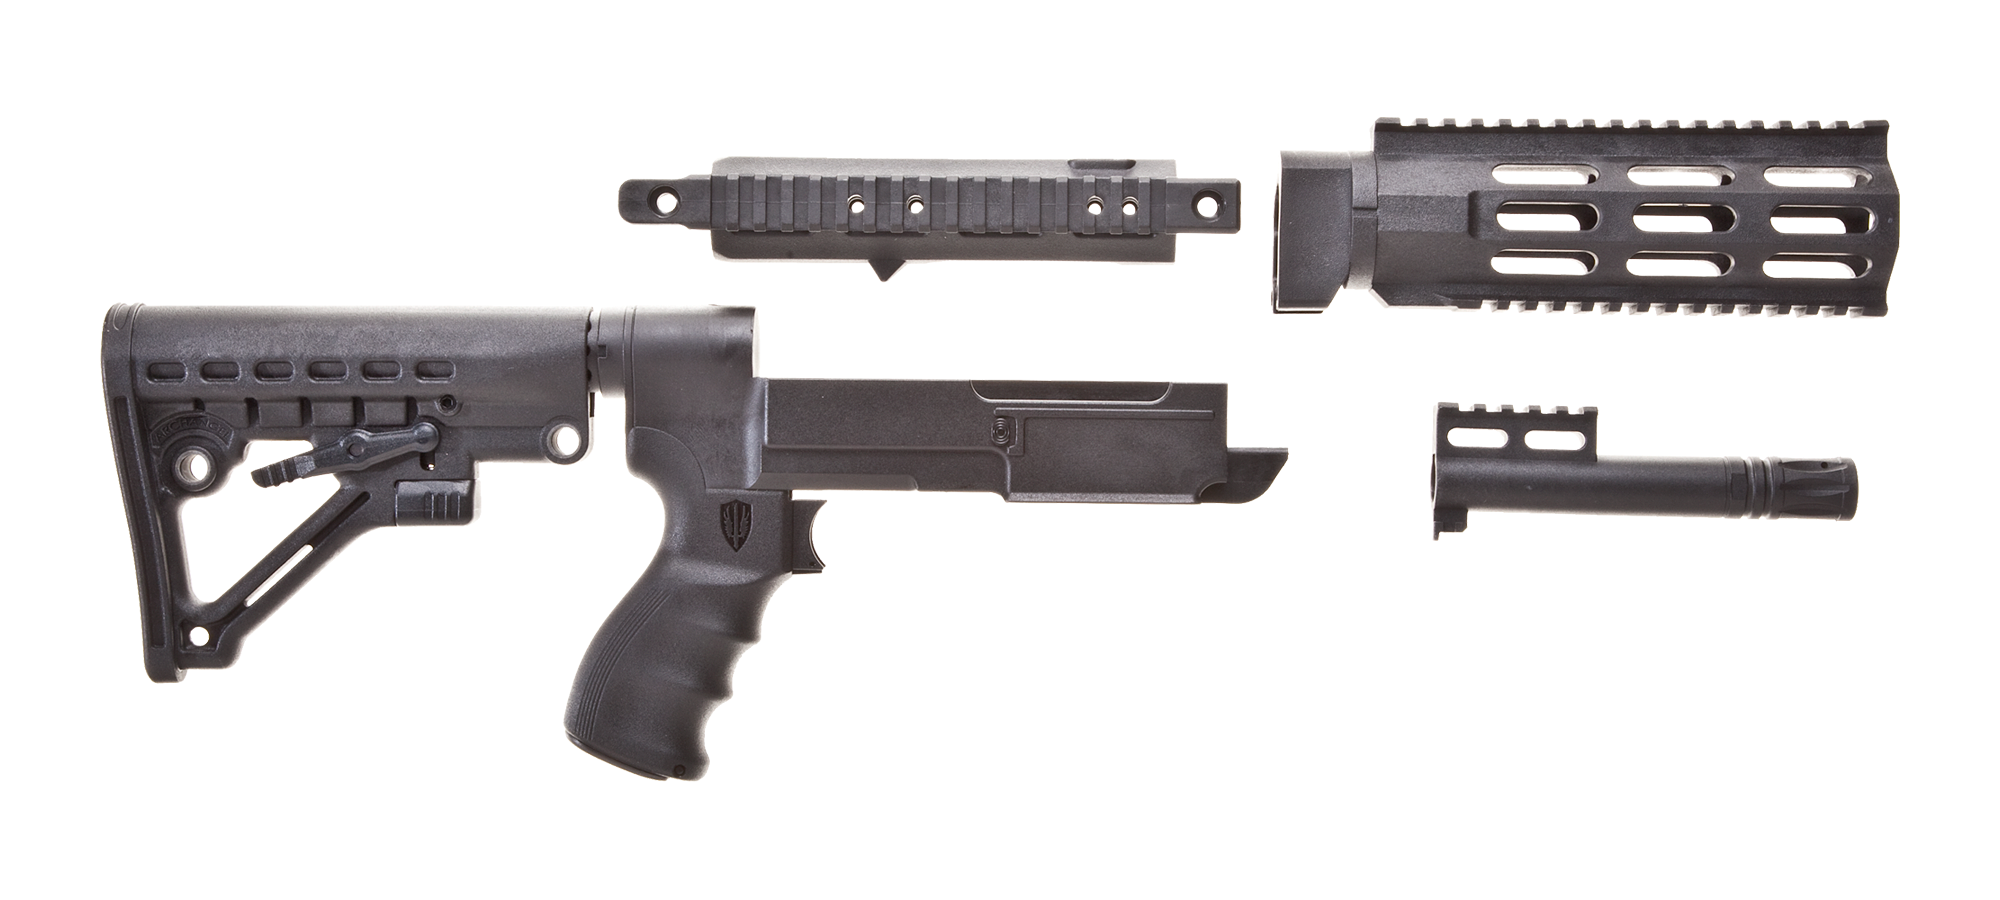 Archangel 556 AR-15 Style Conversion Stock for the Ruger 10/22